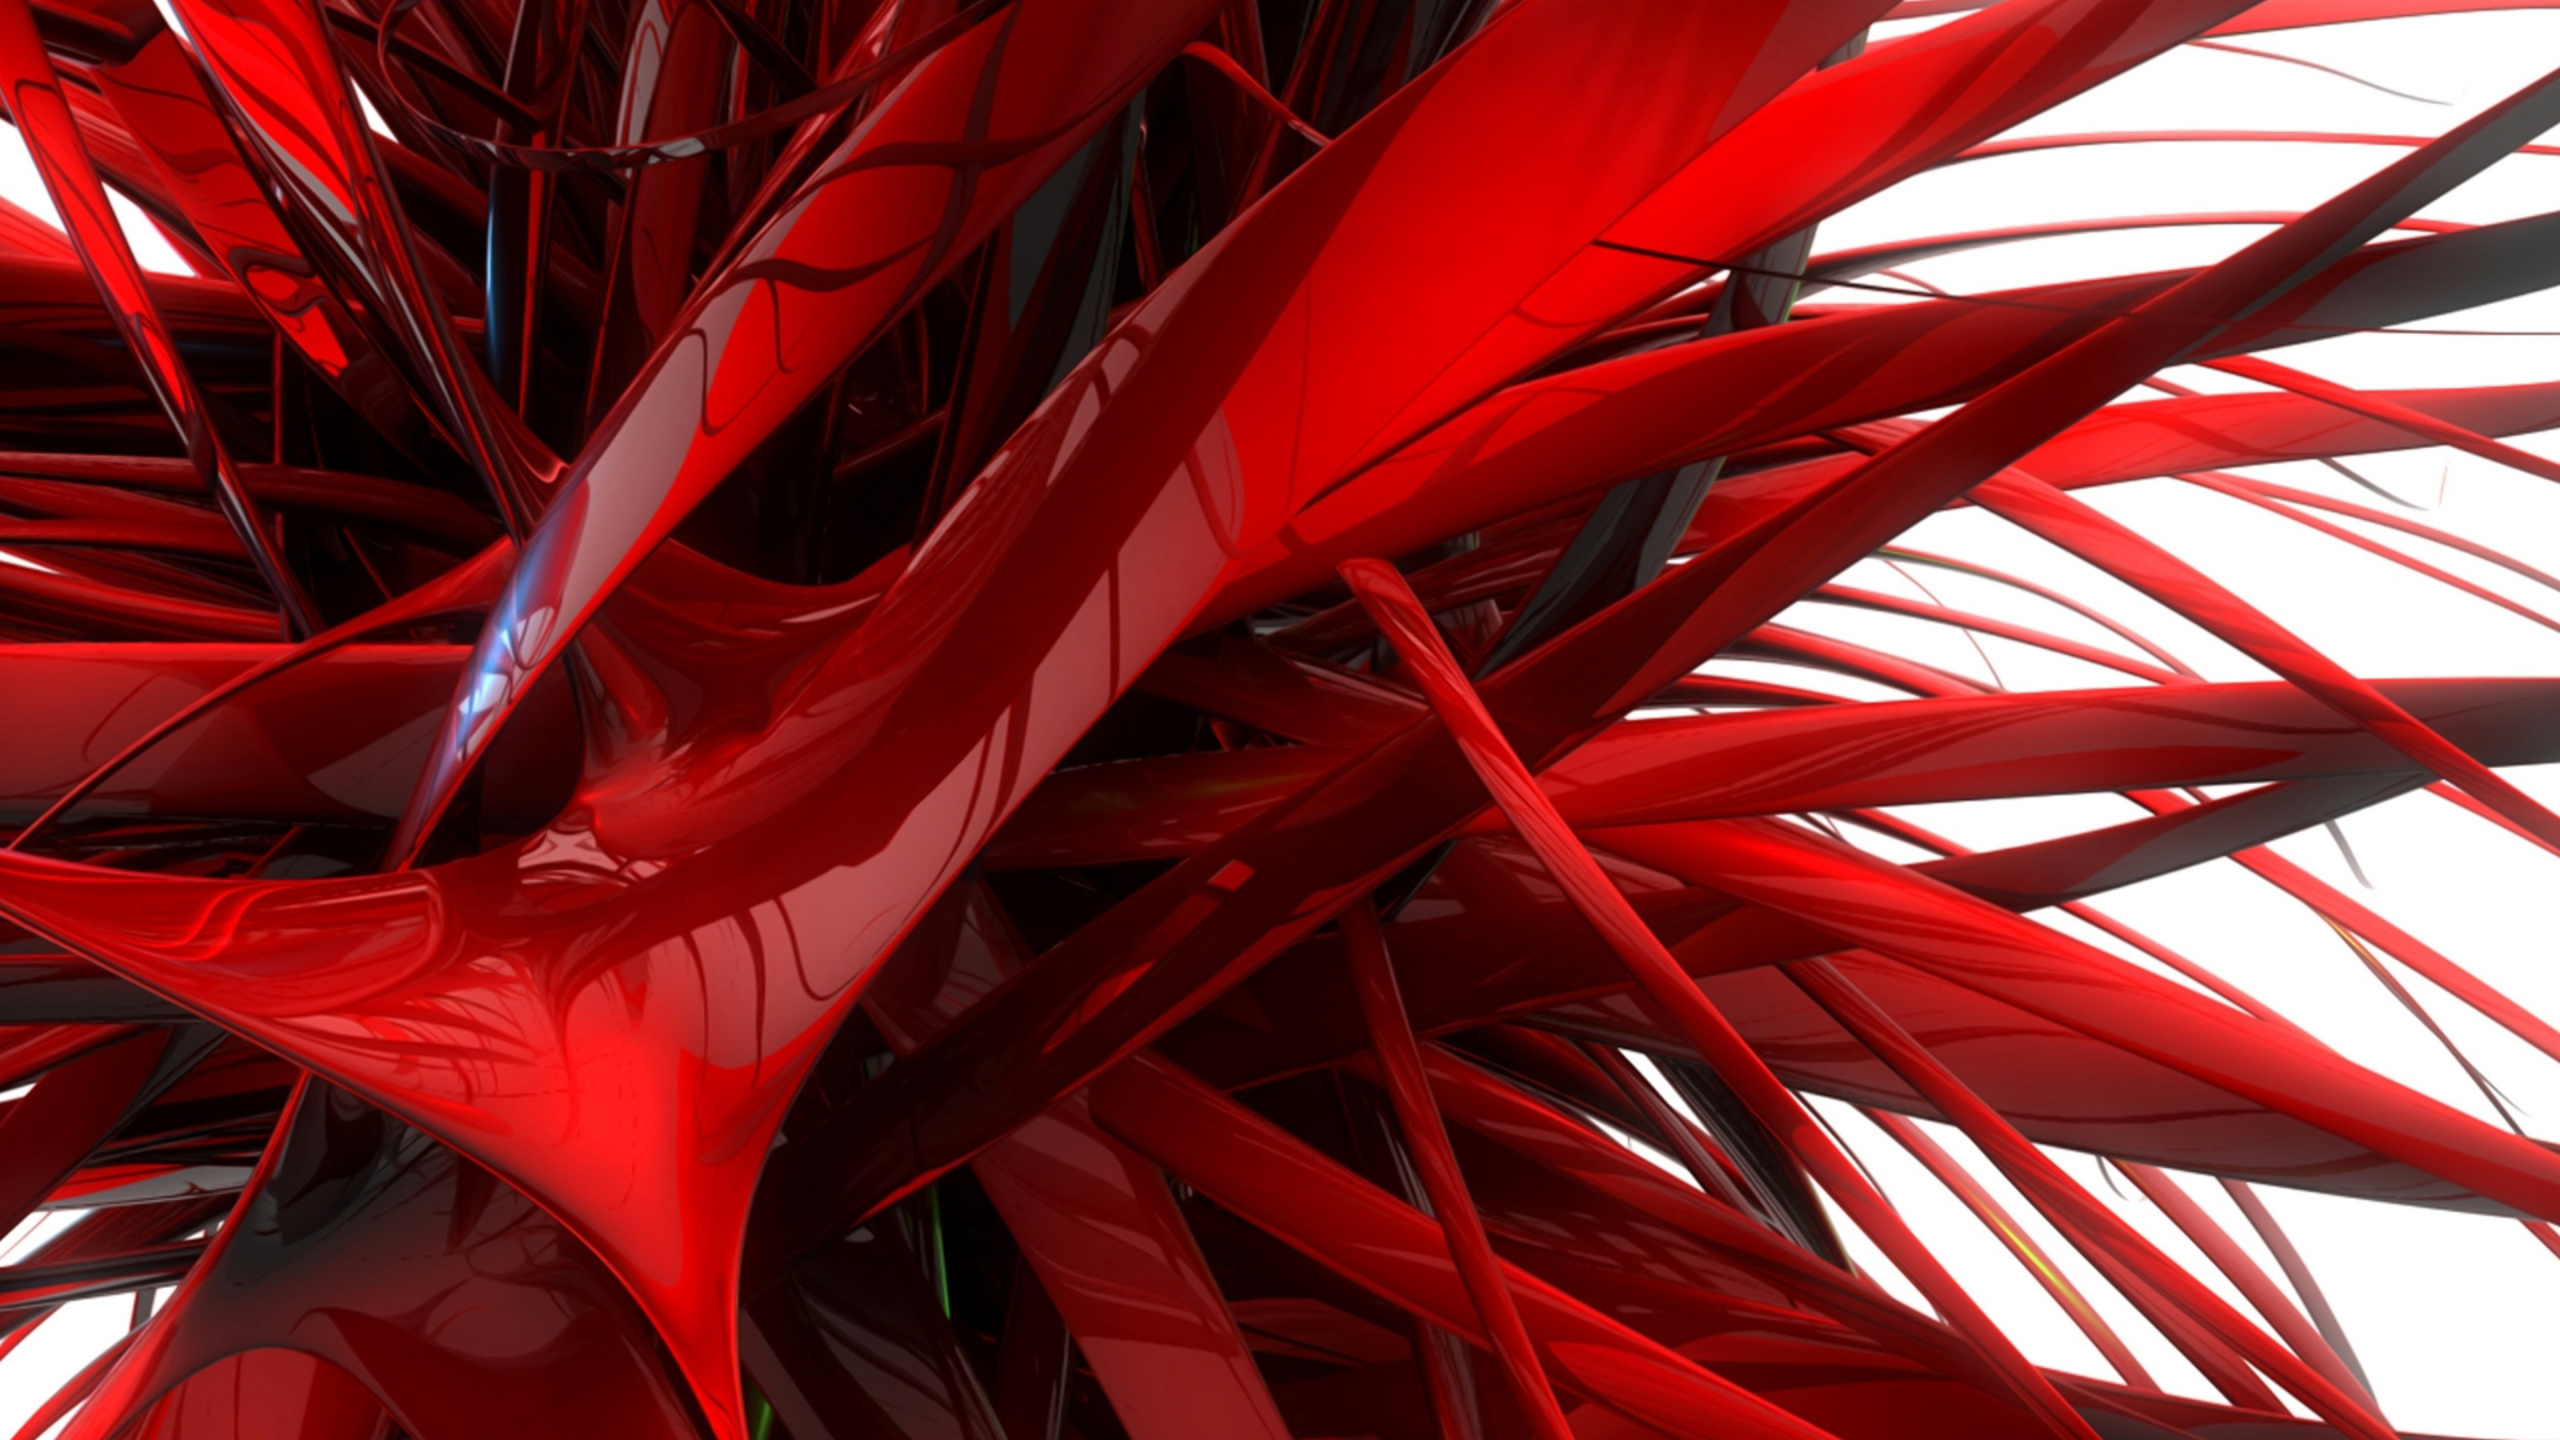 Red and White Abstract Painting. Wallpaper in 2560x1440 Resolution